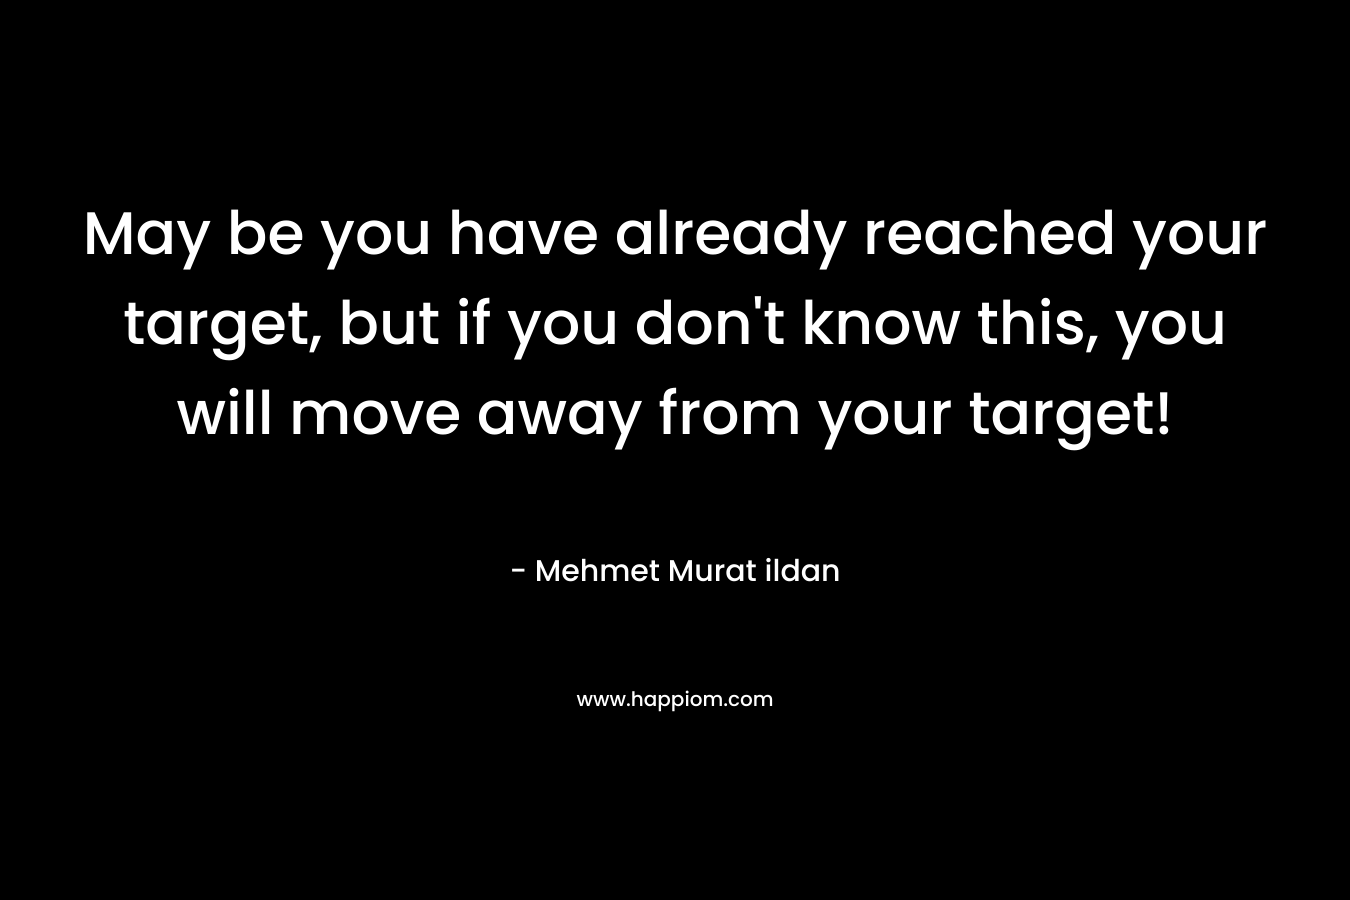 May be you have already reached your target, but if you don't know this, you will move away from your target!